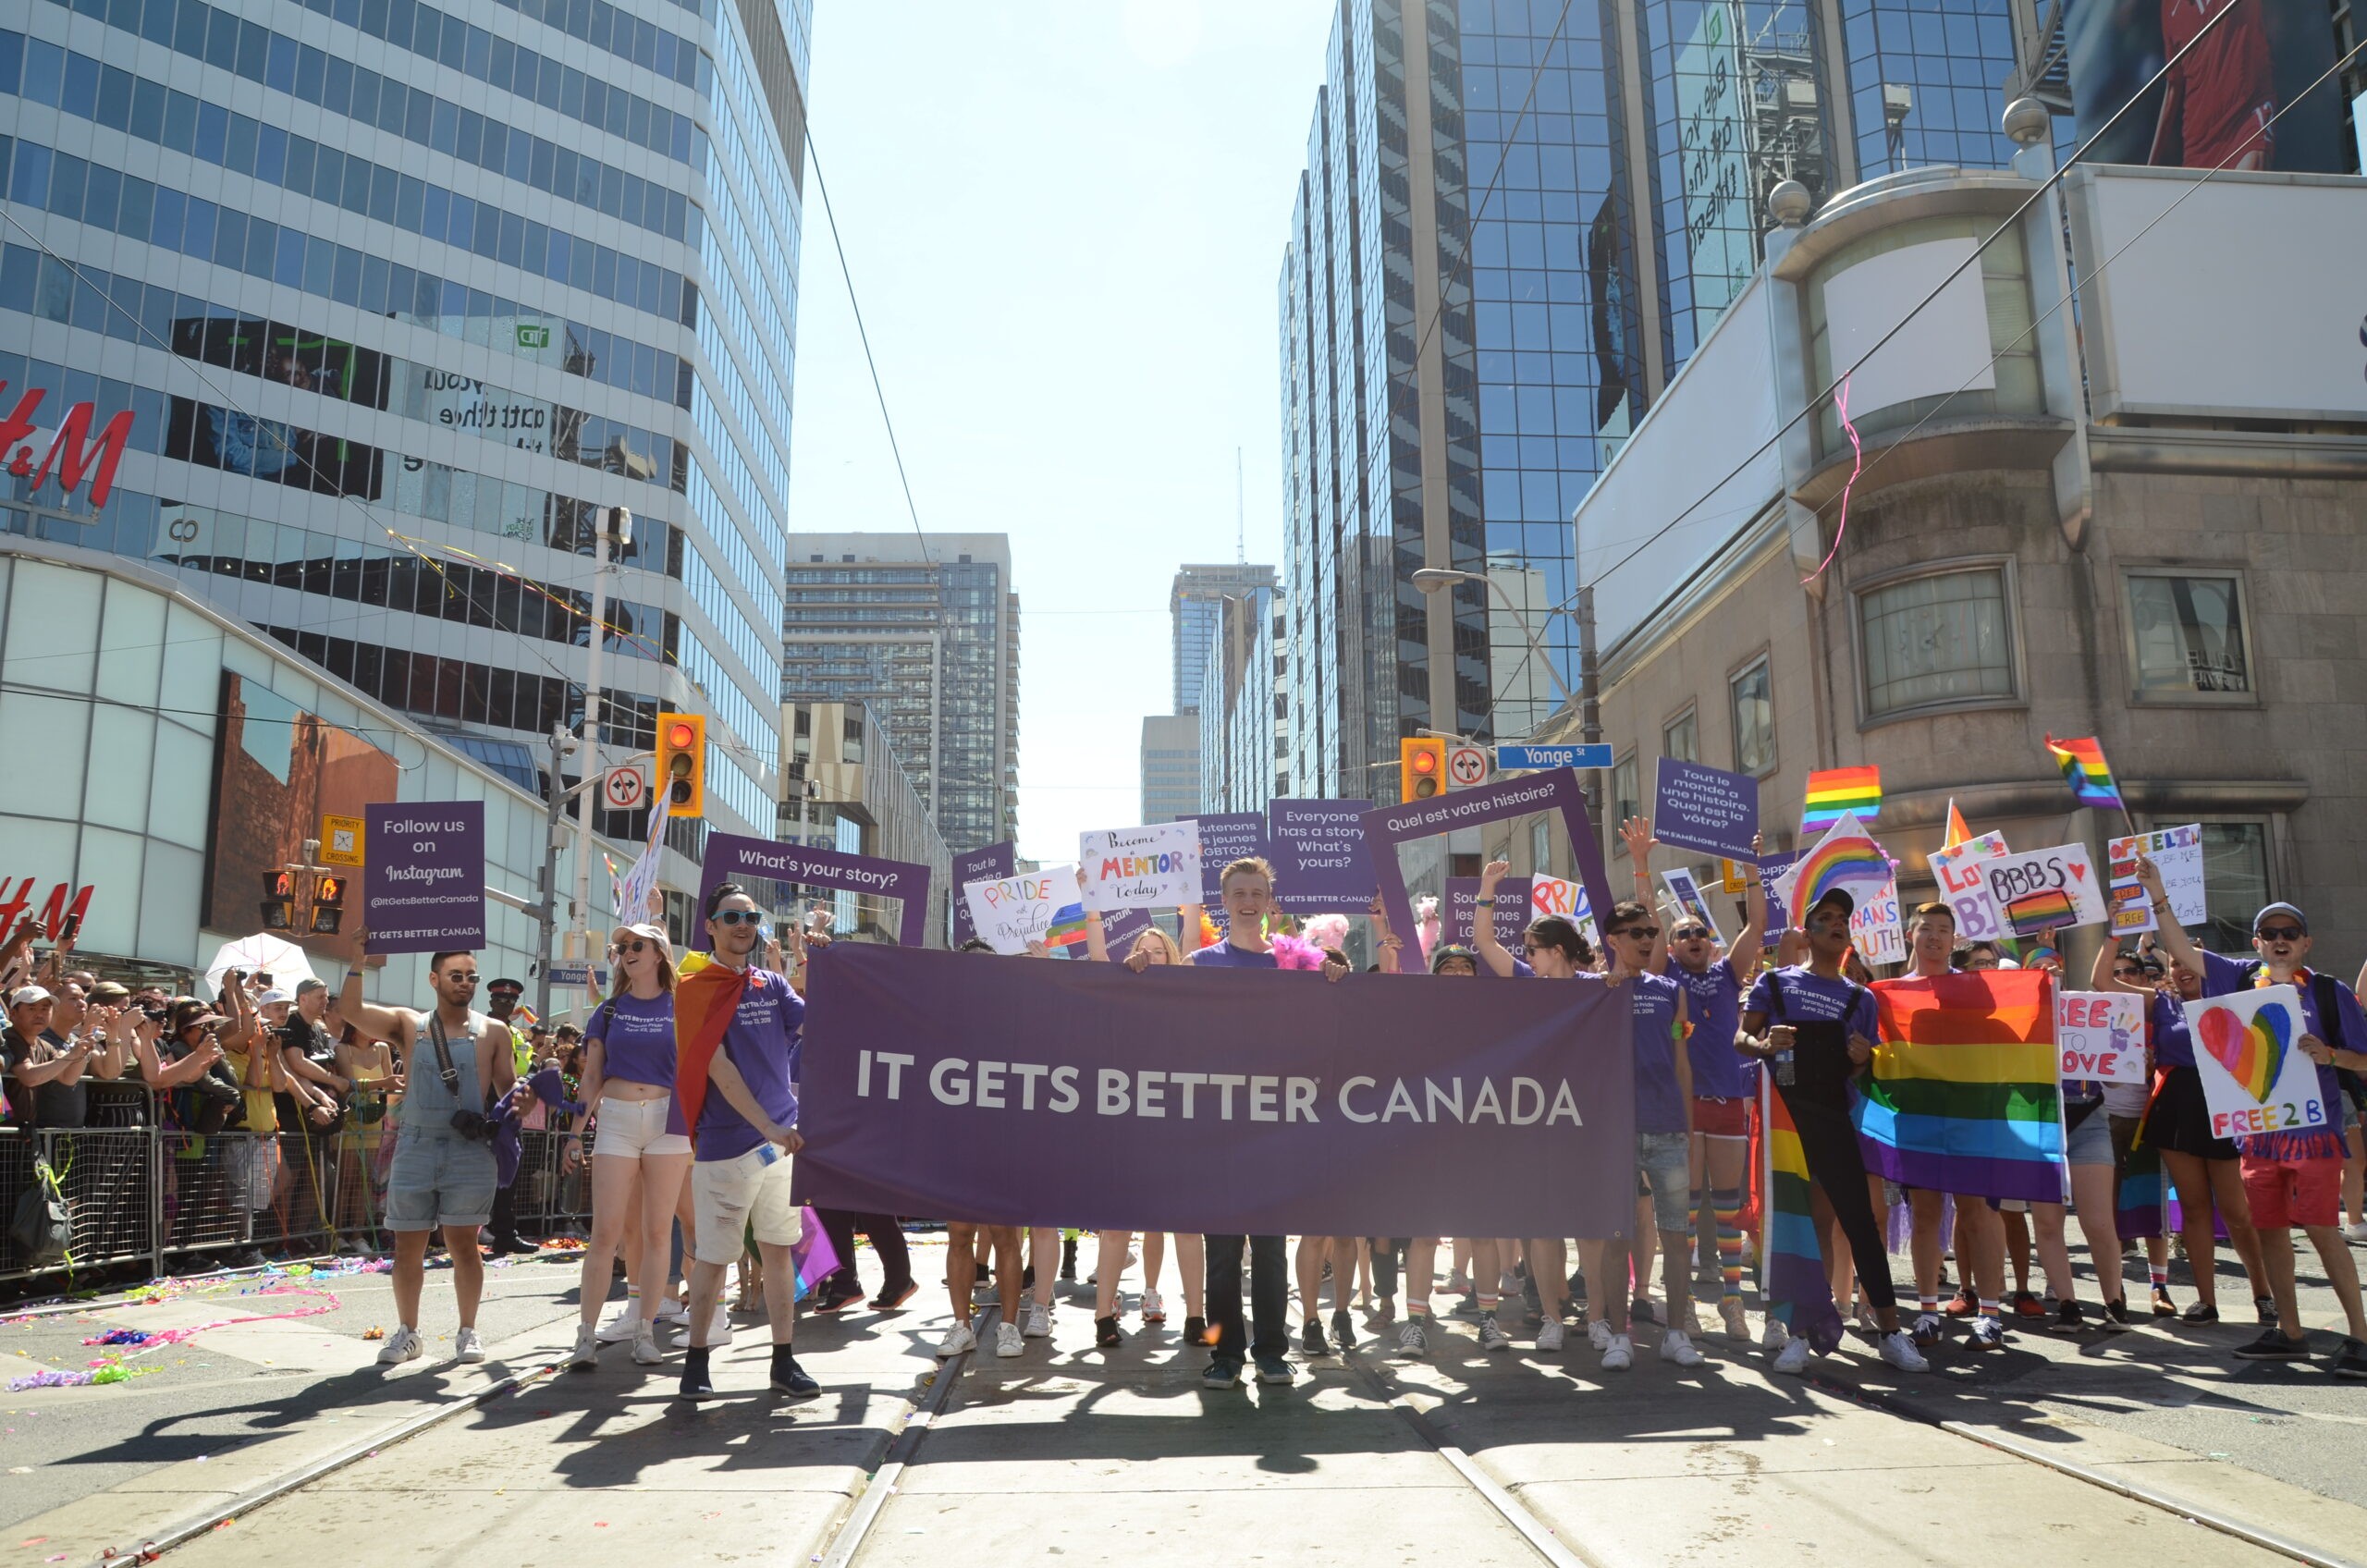 It Gets Better Pride 2019 Group marching in Toronto